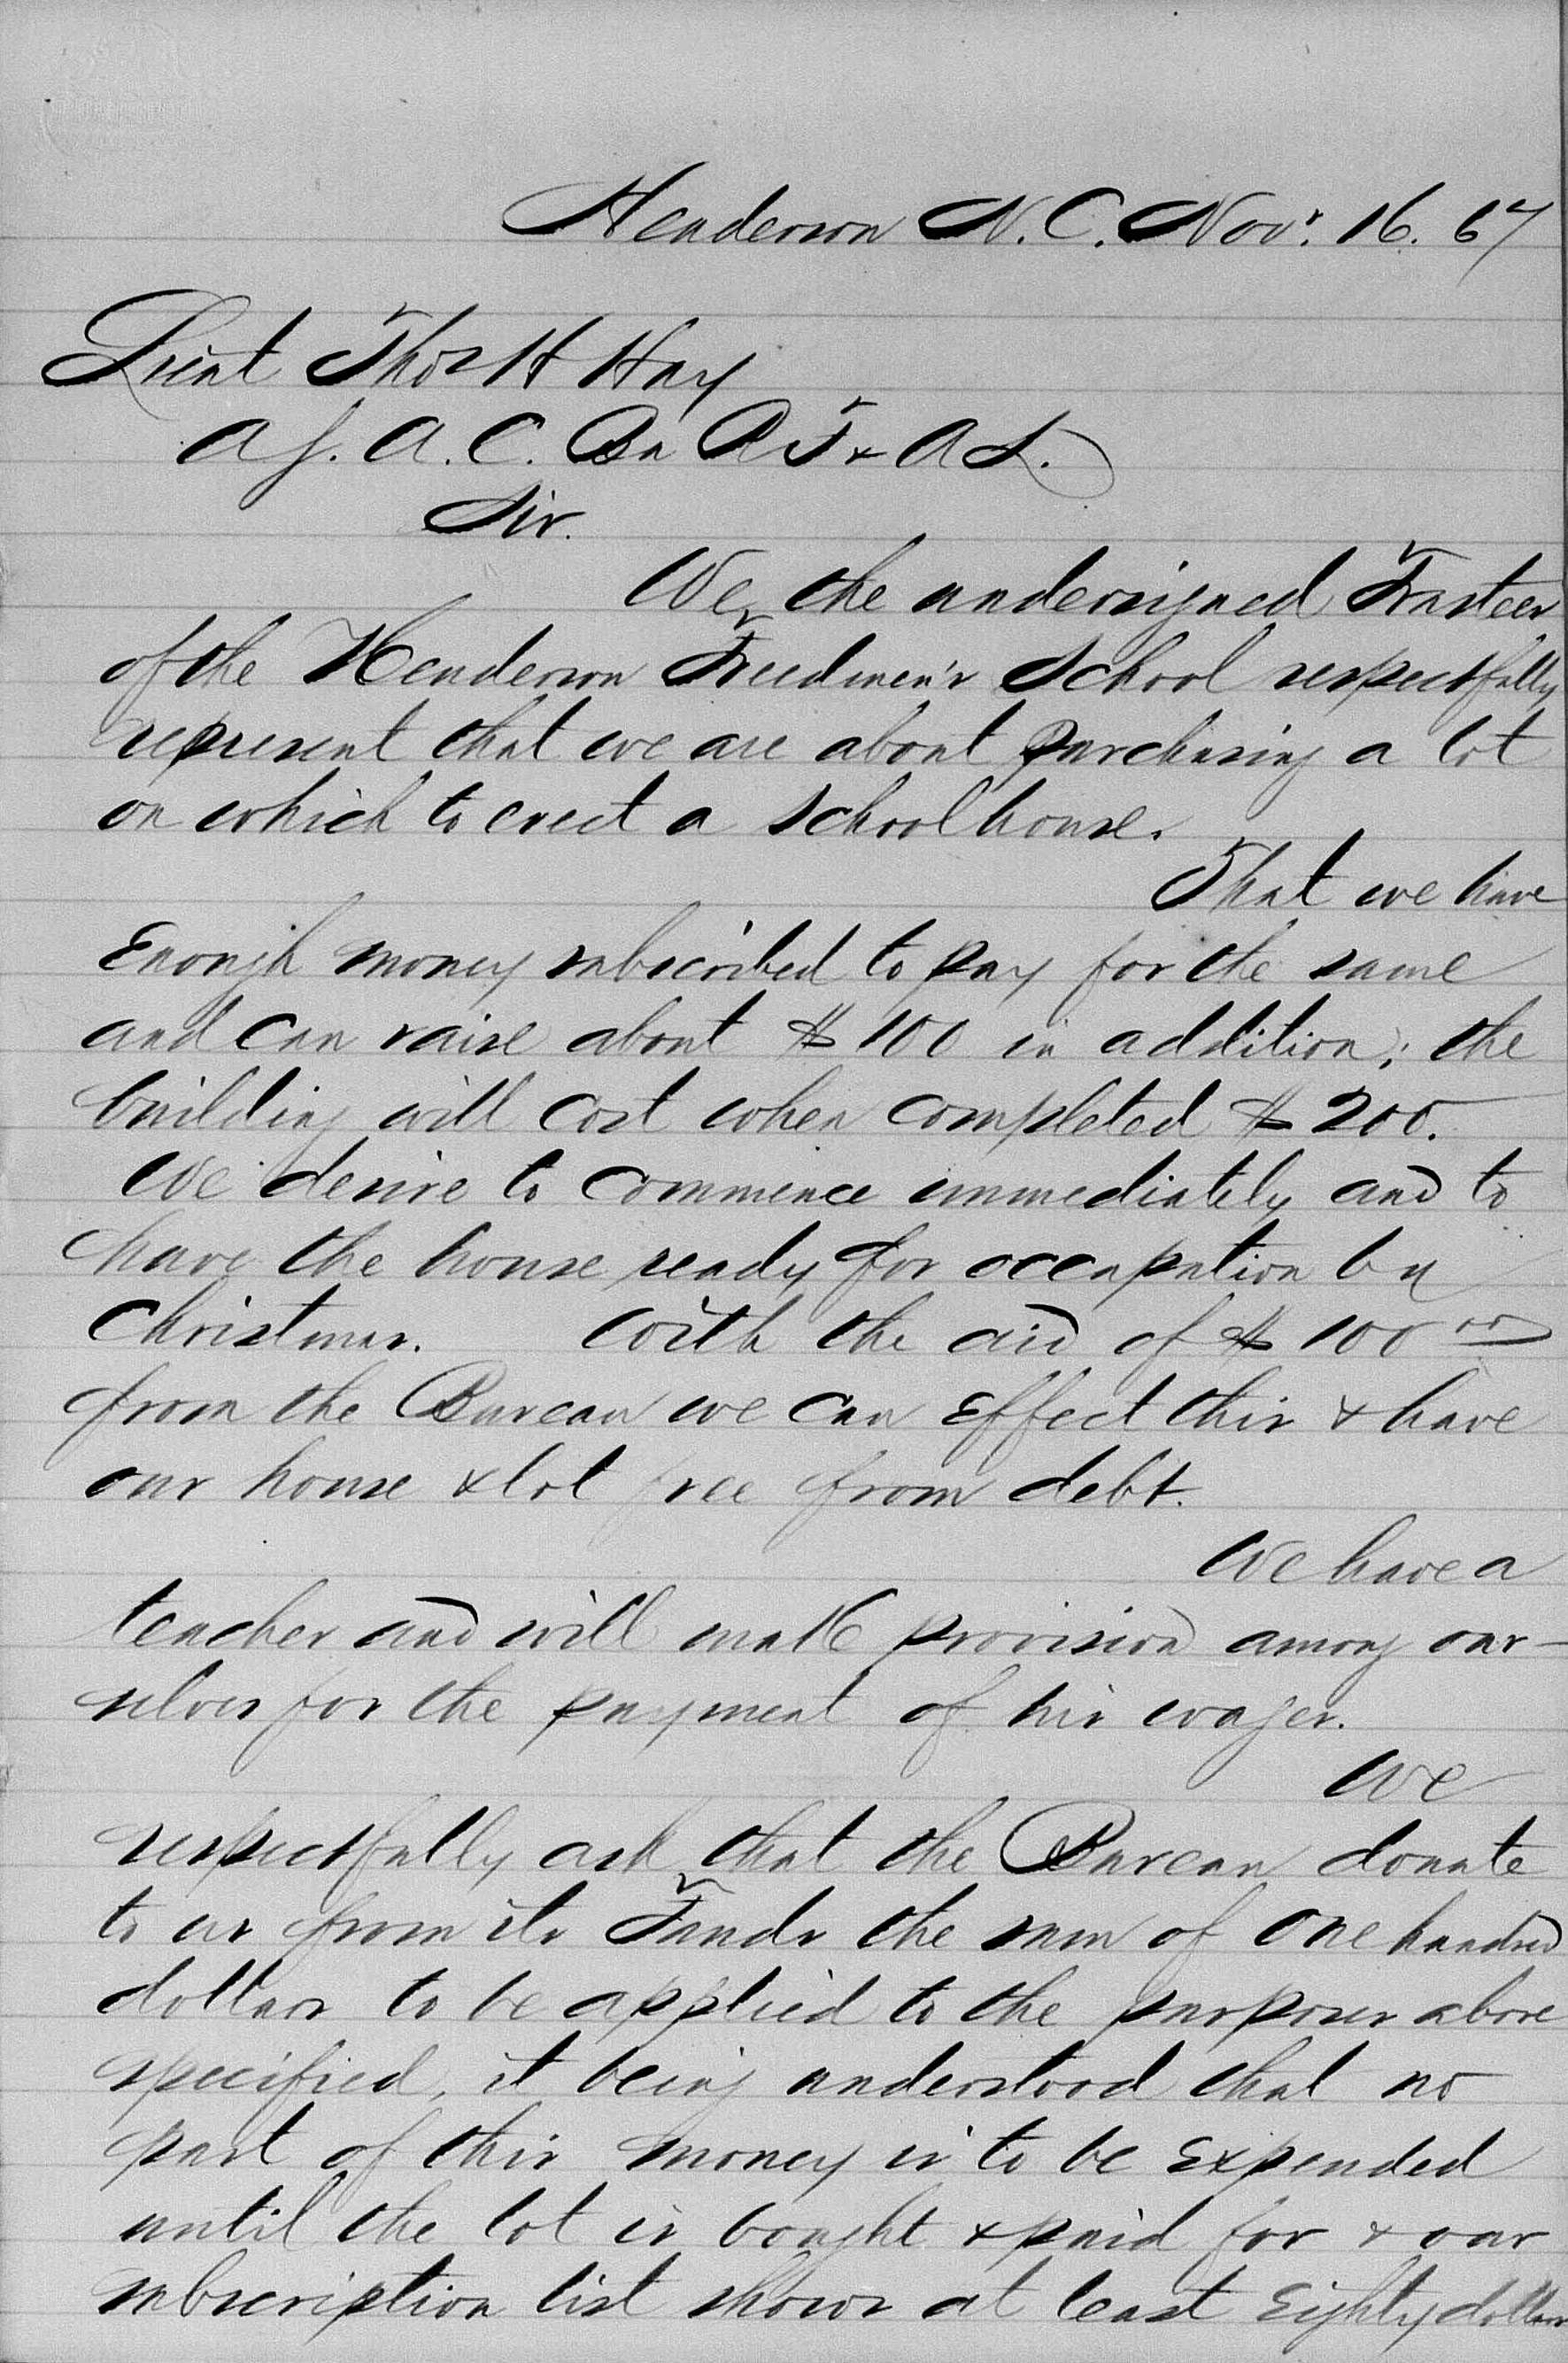 A handwritten petition for a school on a lined paper. The petition, that fills whole page, has multiple paragraphs.